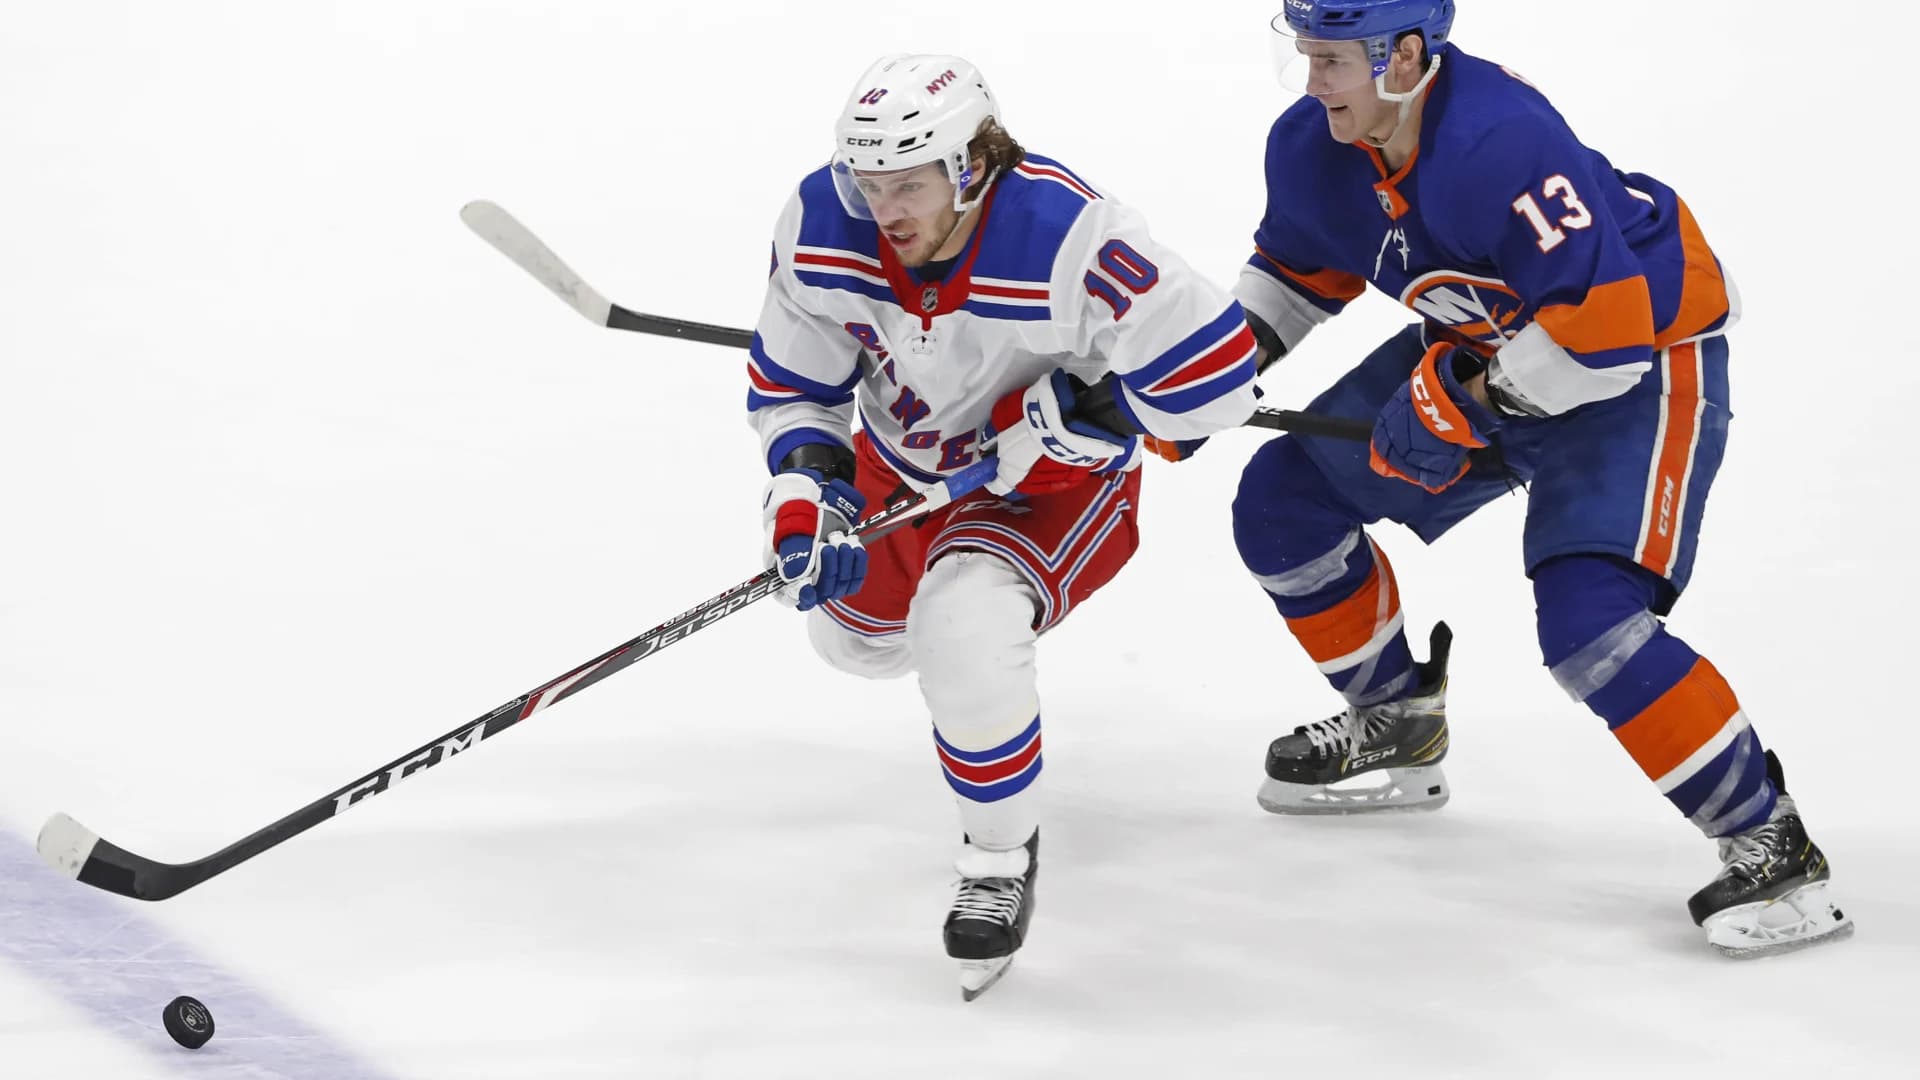 Isles, Rangers open up 2021 season with back-to-back matchups